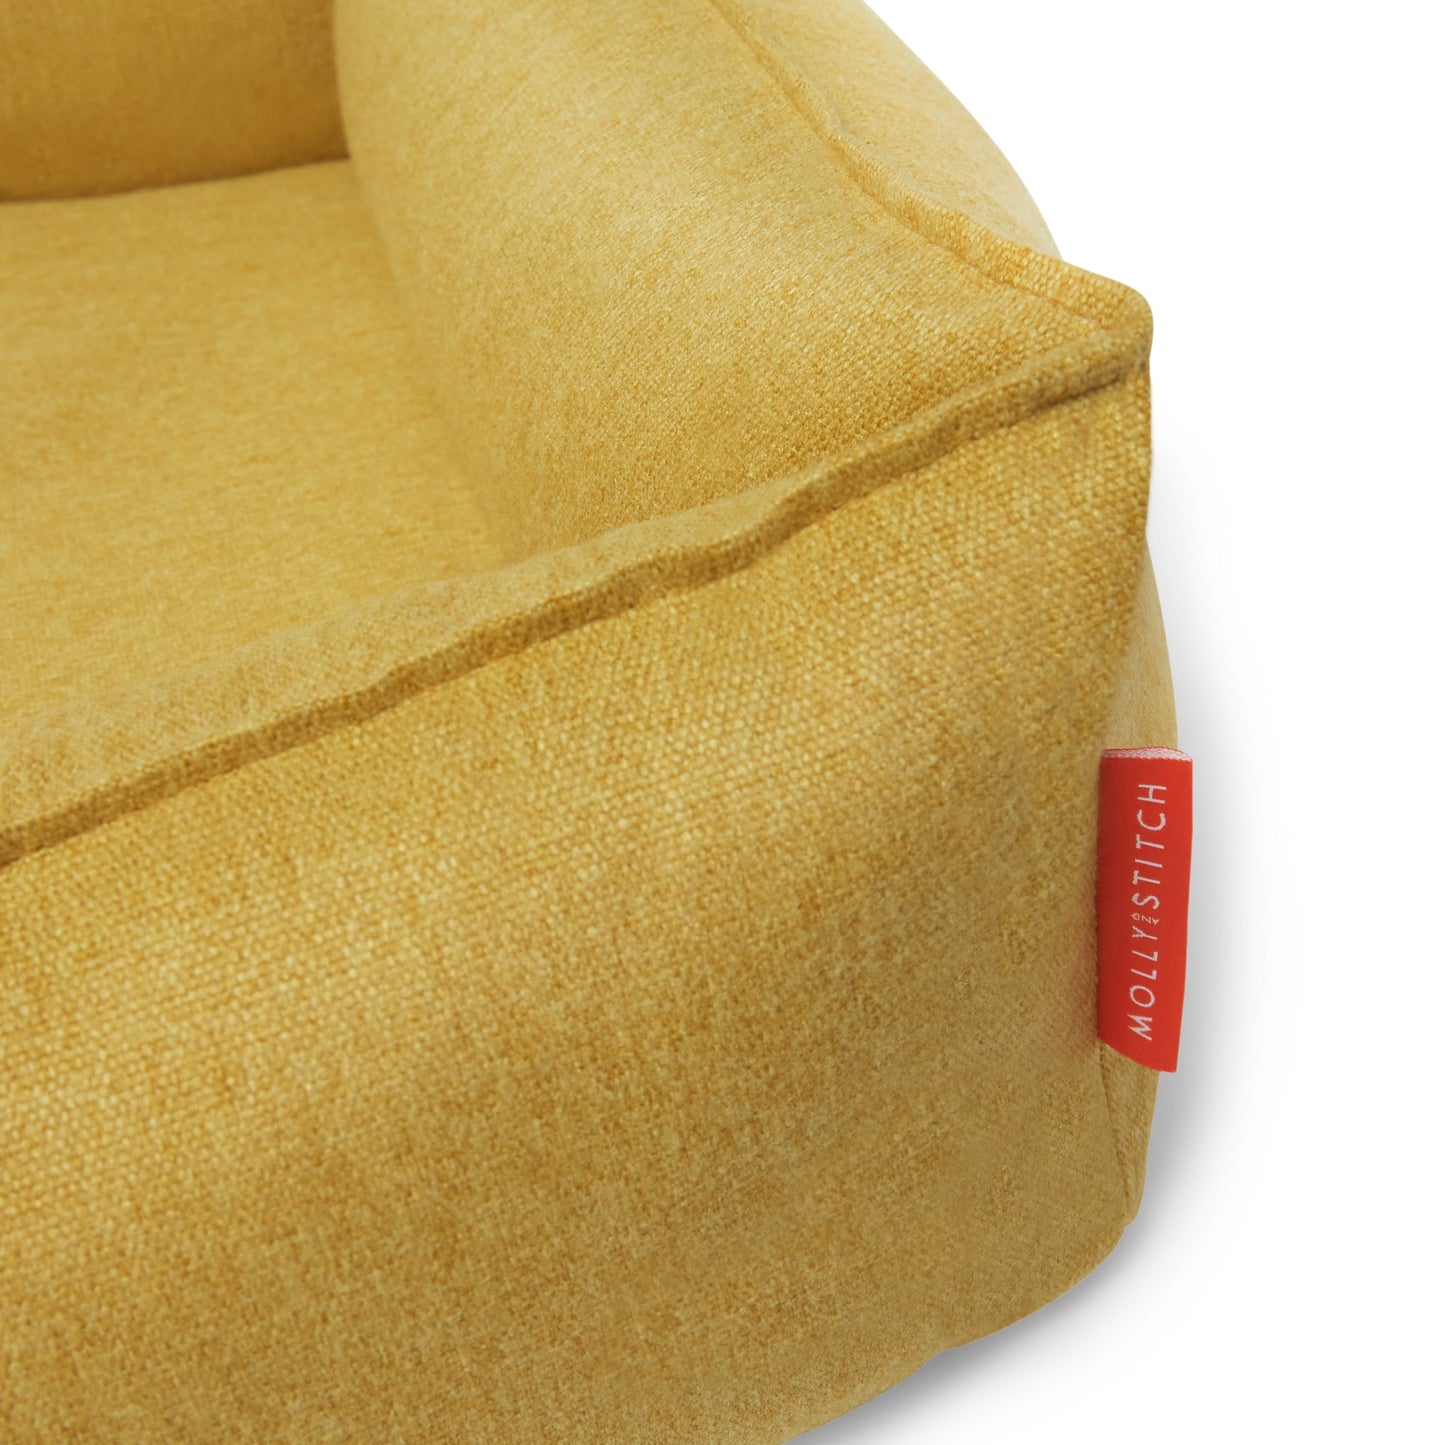 Alpine Dog Bed - Mustard by Molly And Stitch US